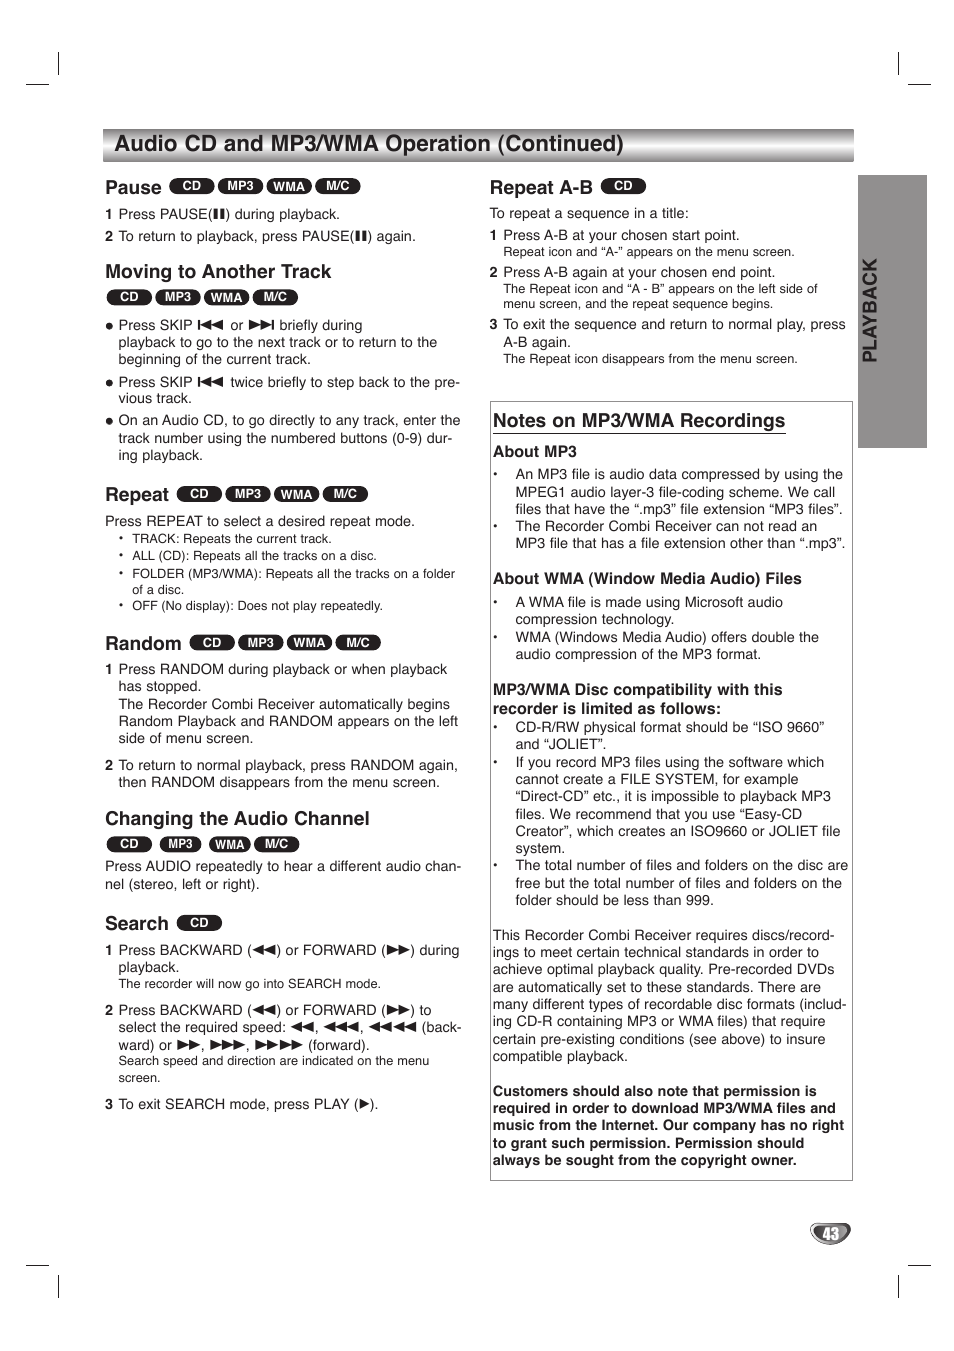 Audio cd and mp3/wma operation (continued), Pla yback, Pause | Moving to another track, Repeat, Random, Changing the audio channel, Search, Repeat a-b | LG LHY-518 User Manual | Page 43 / 75